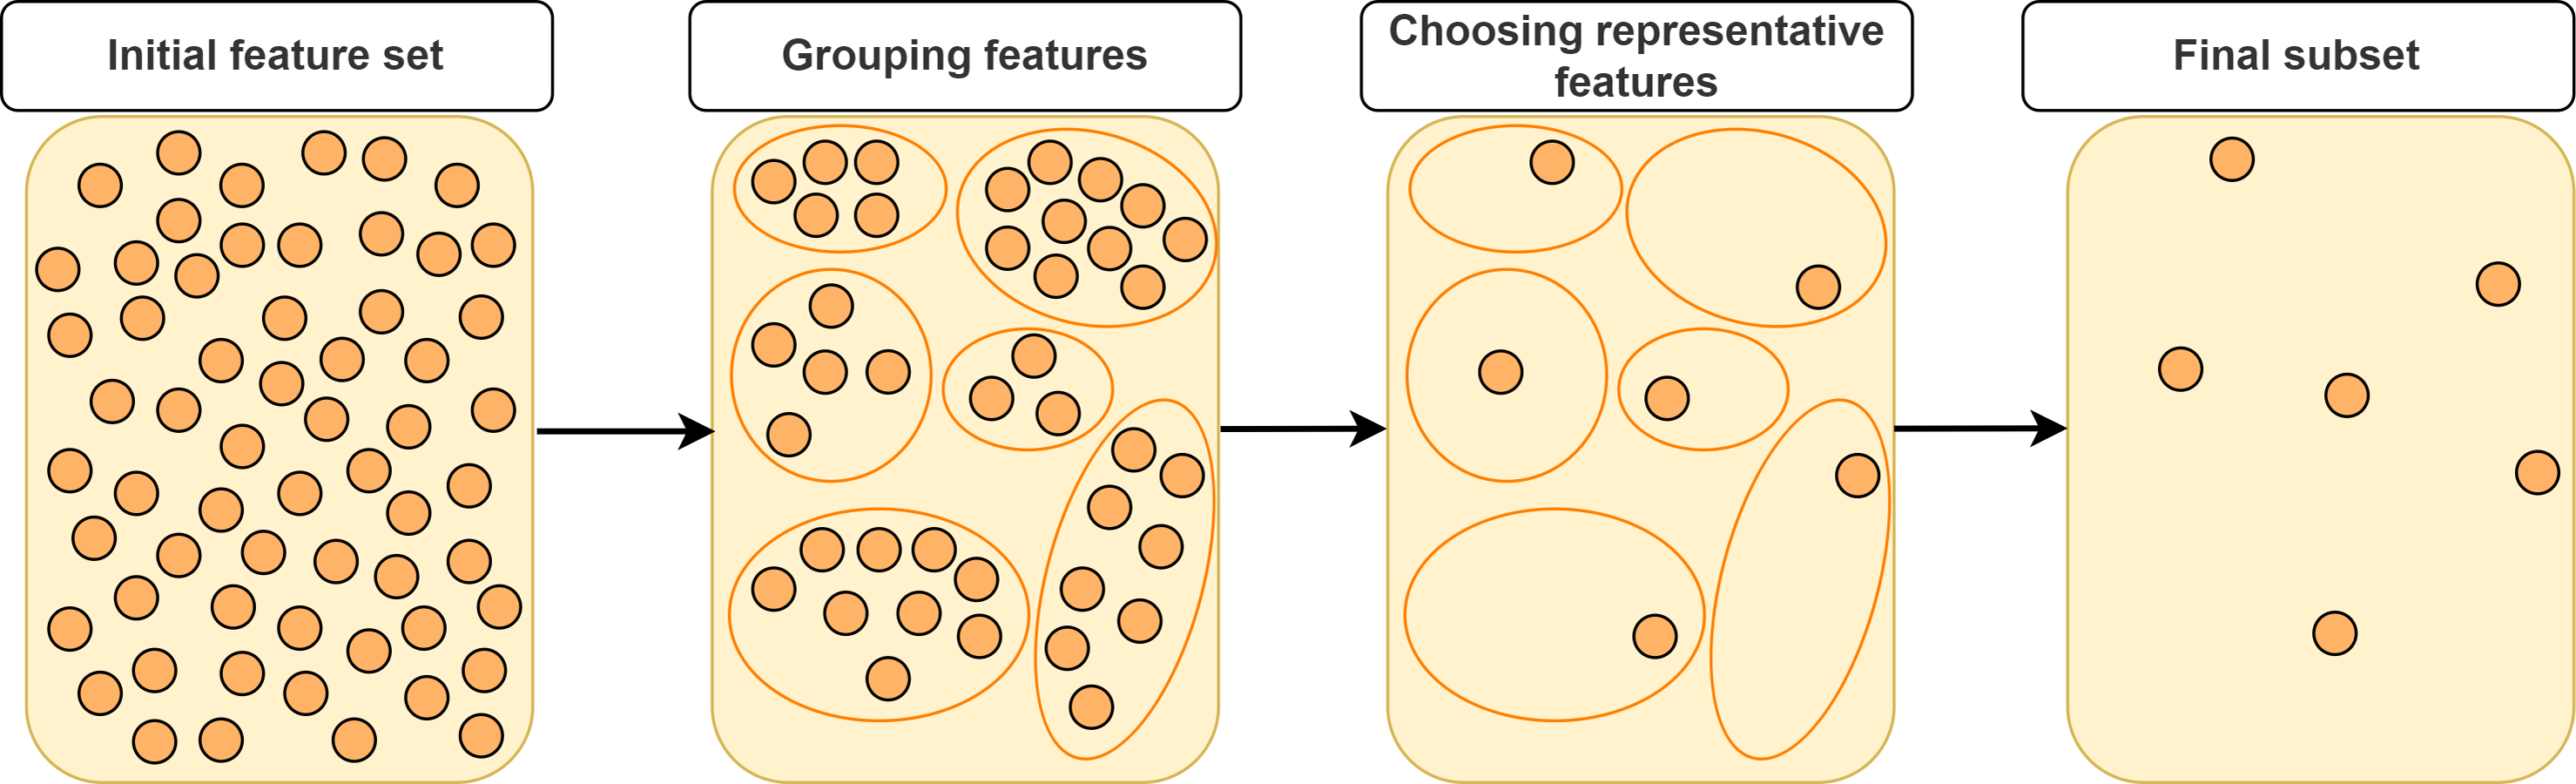 Review of feature selection approaches based on grouping of